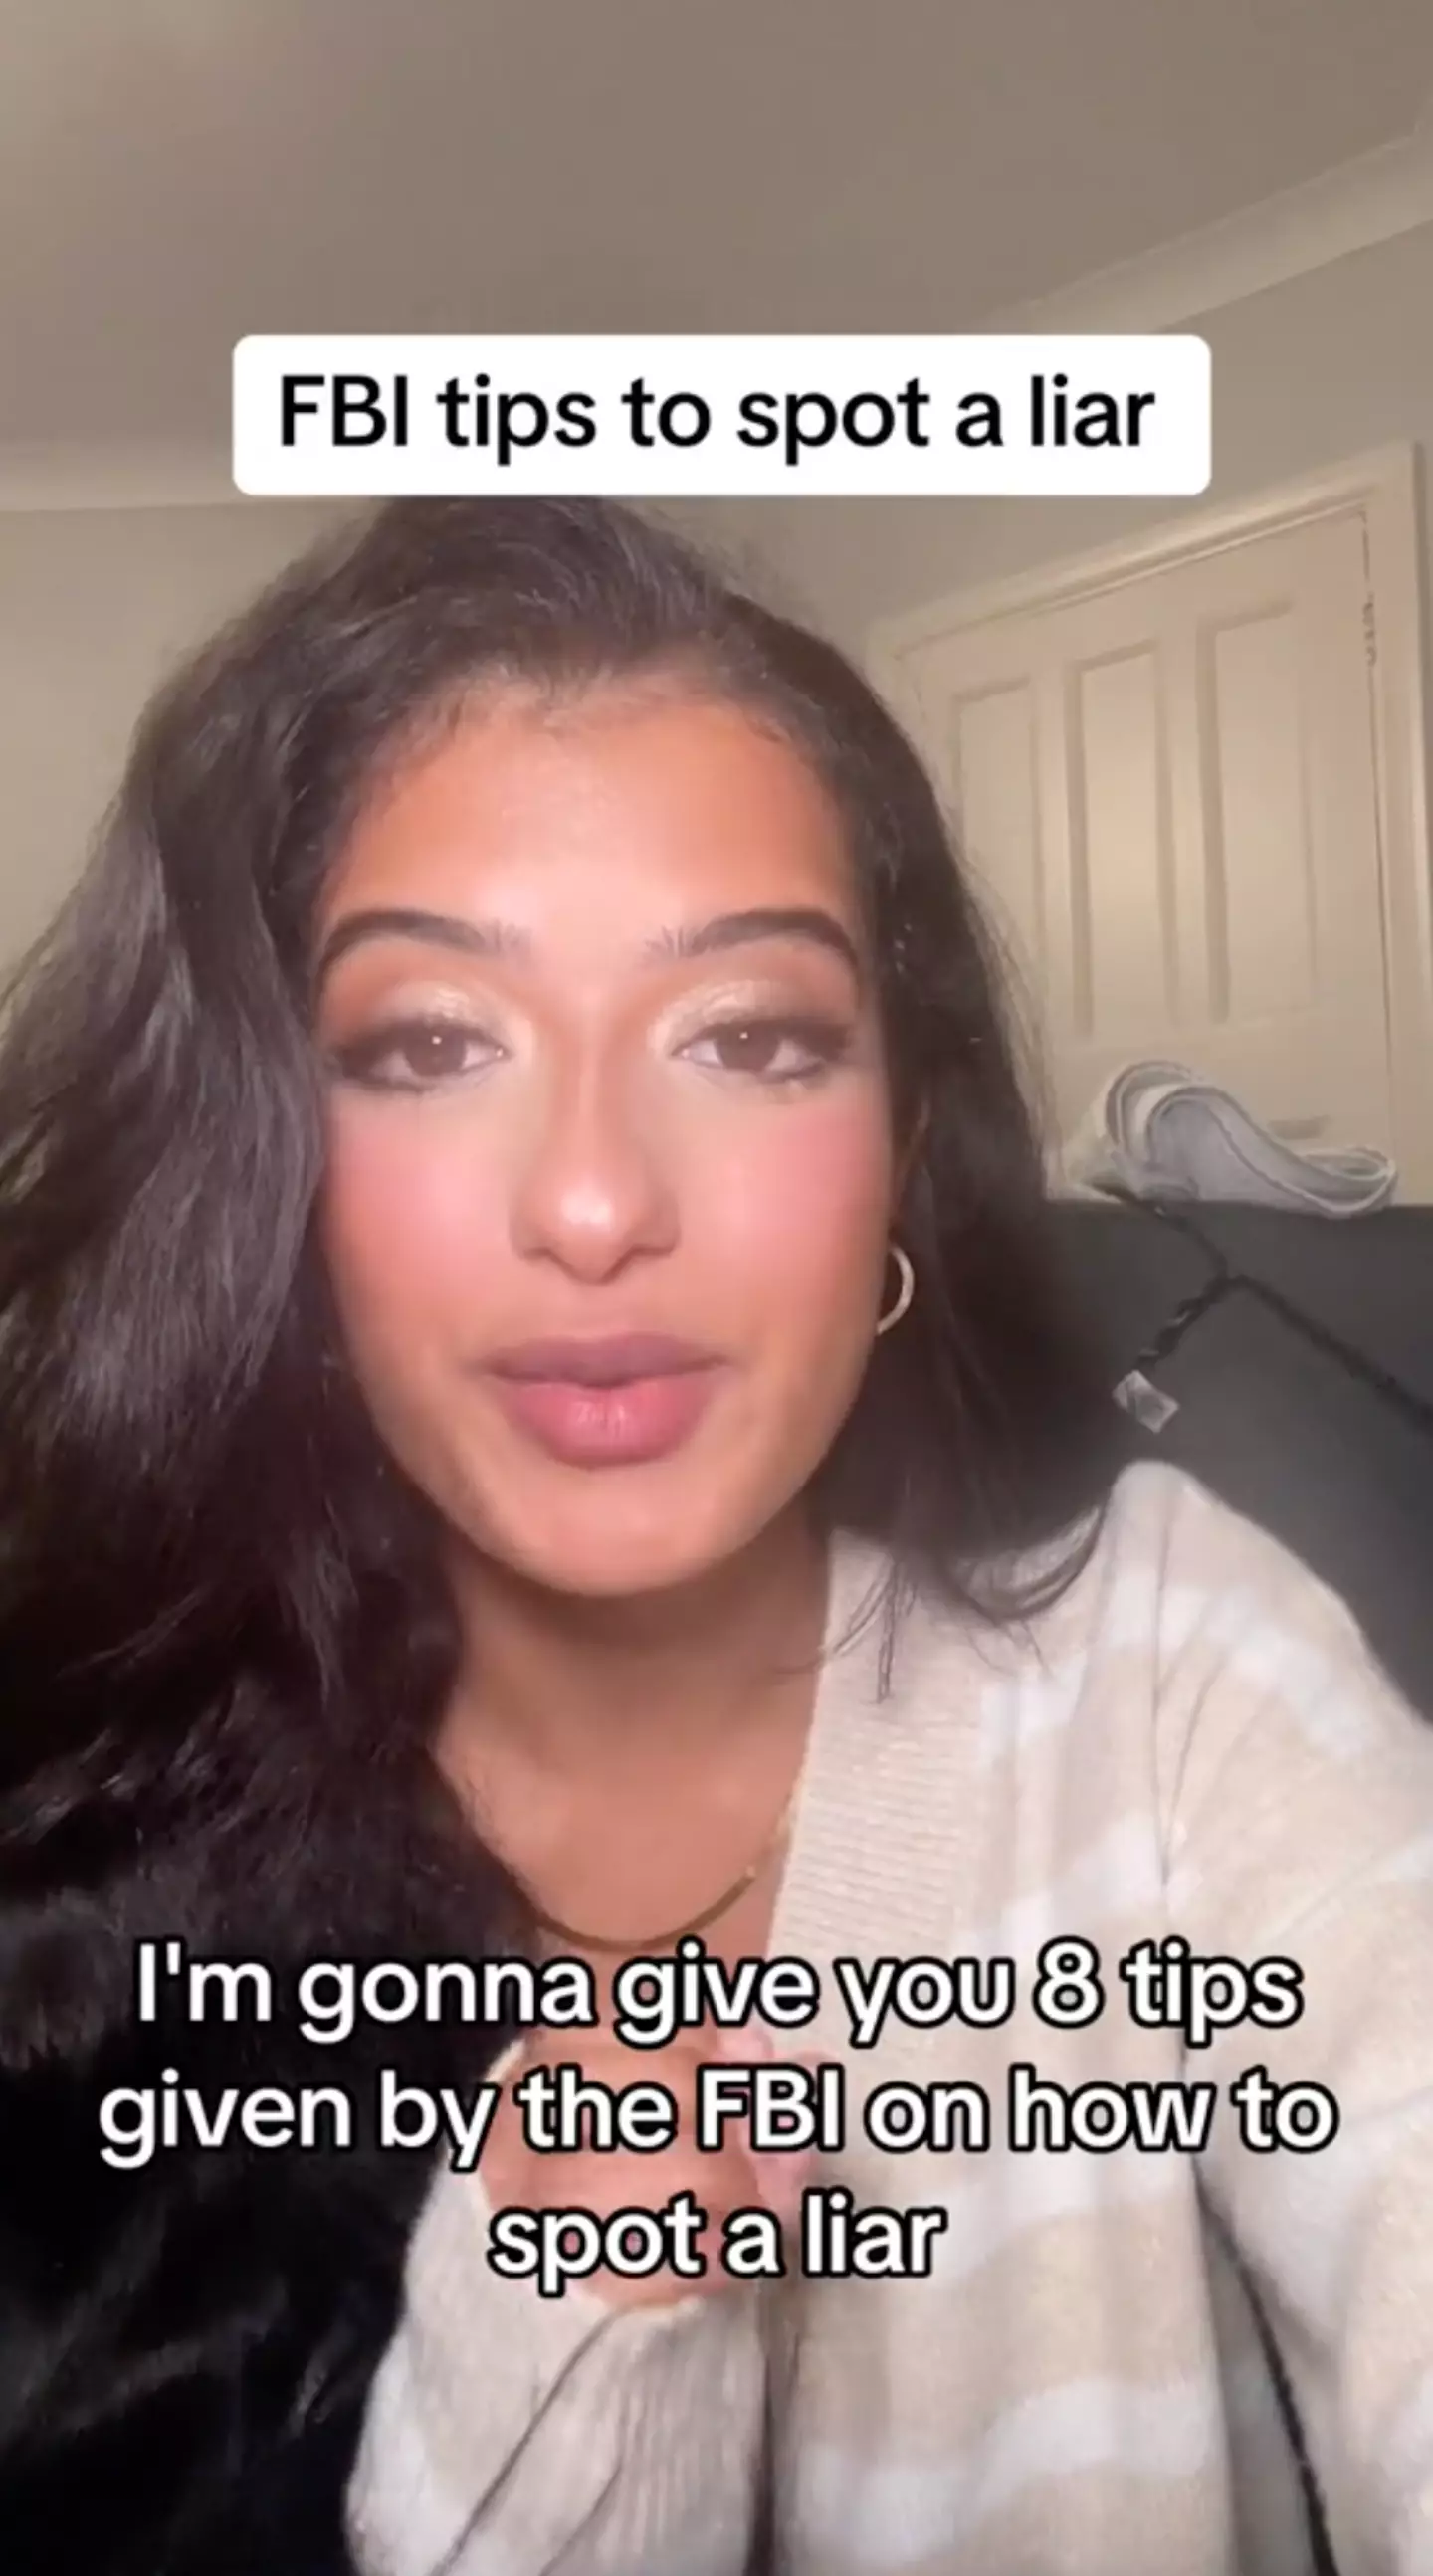 One woman took to TikTok to share the tell-tale signs to be wary of when trying to catch a liar.